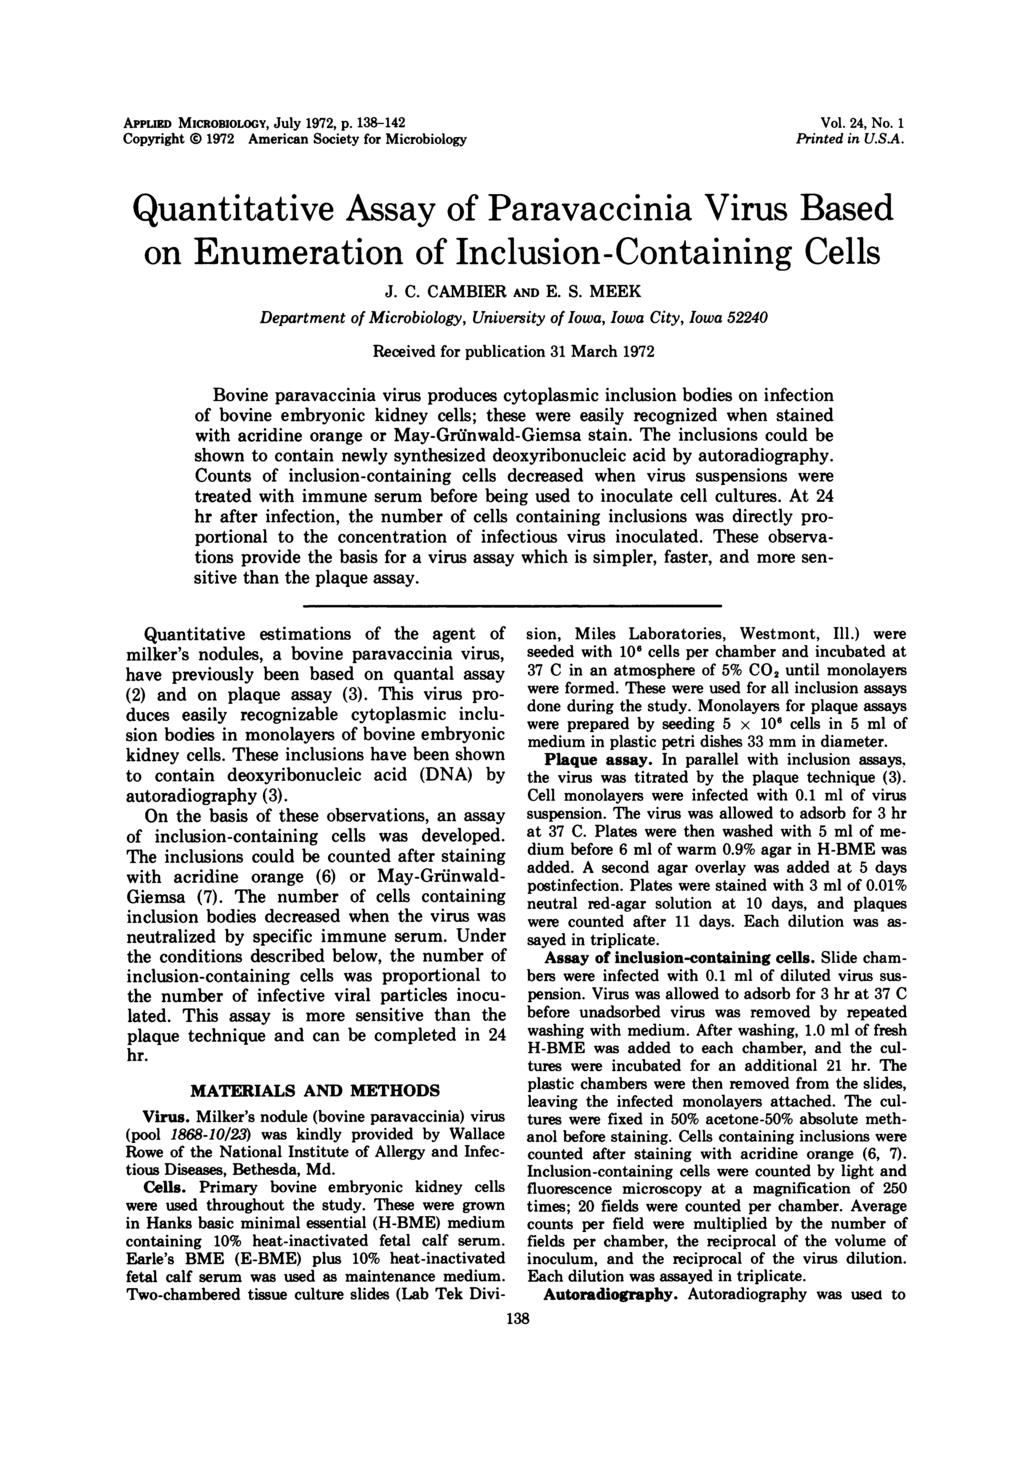 APPrU MICROBIOLOGY, JUly 1972, p. 138-142 Copyright 1972 American Society for Microbiology Vol. 24, No. 1 Printed in U.S.A. Quantitative Assay of Paravaccinia Virus Based on Enumeration of Inclusion-Containing Cells J.